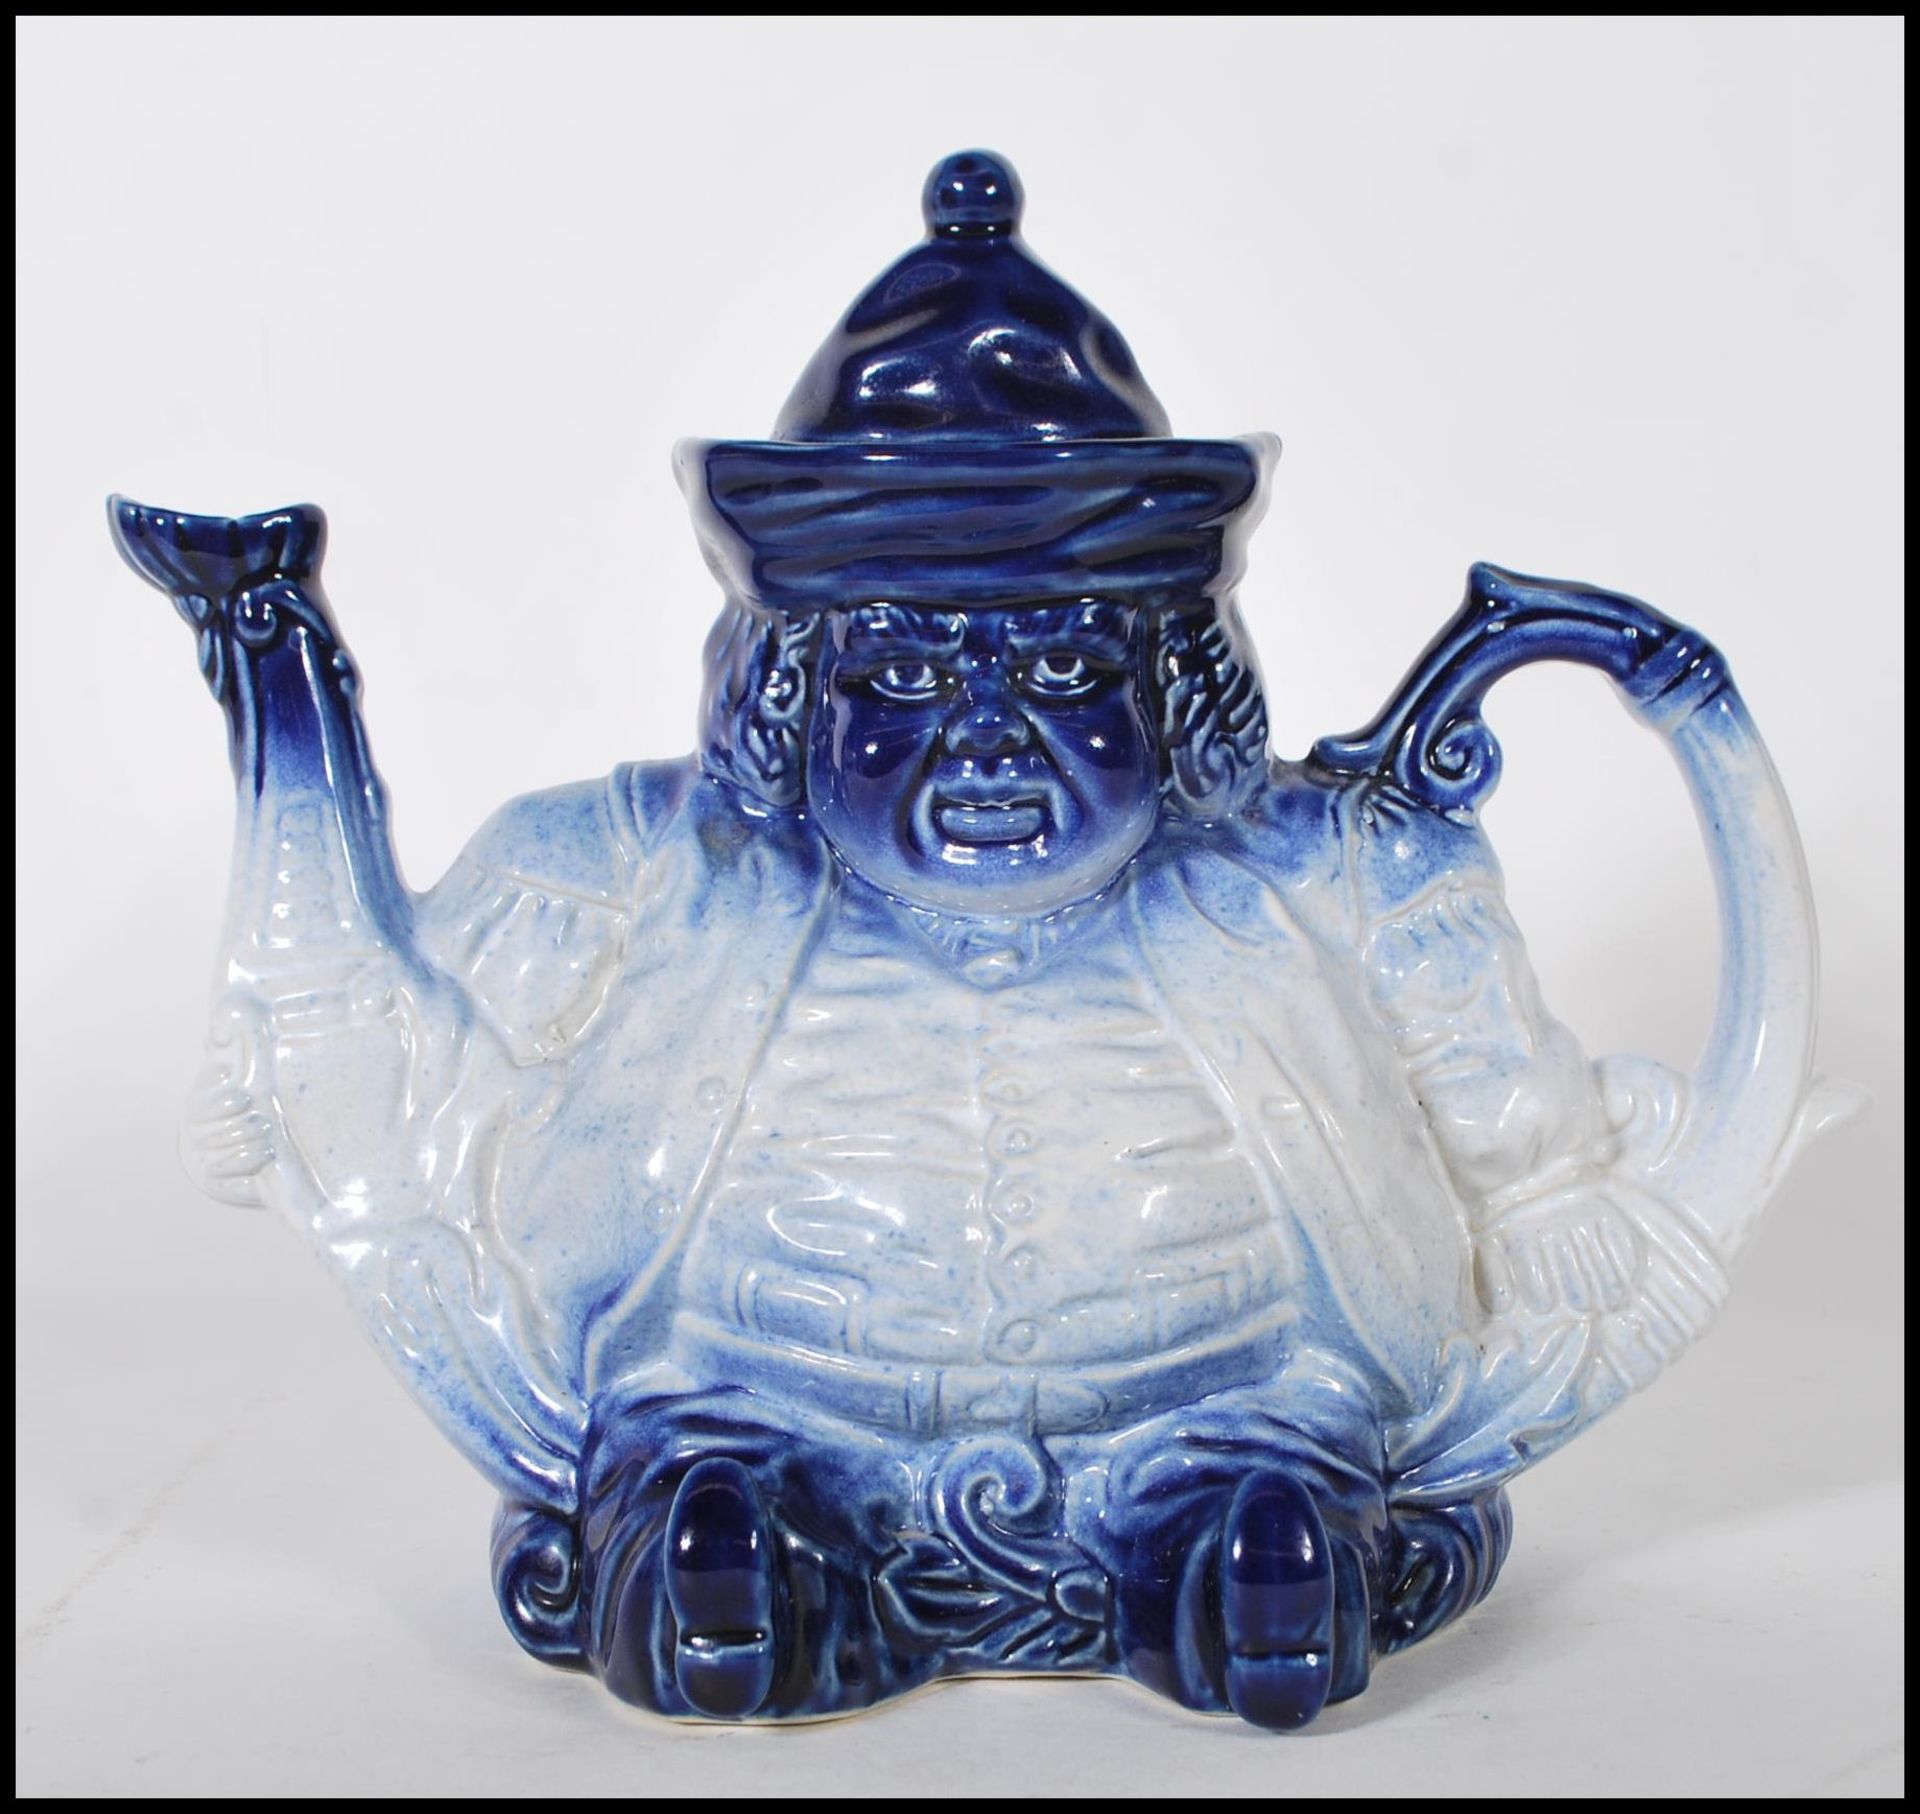 An early 20th Century Staffordshire ceramic teapot in the form of a Toby character. The teapot